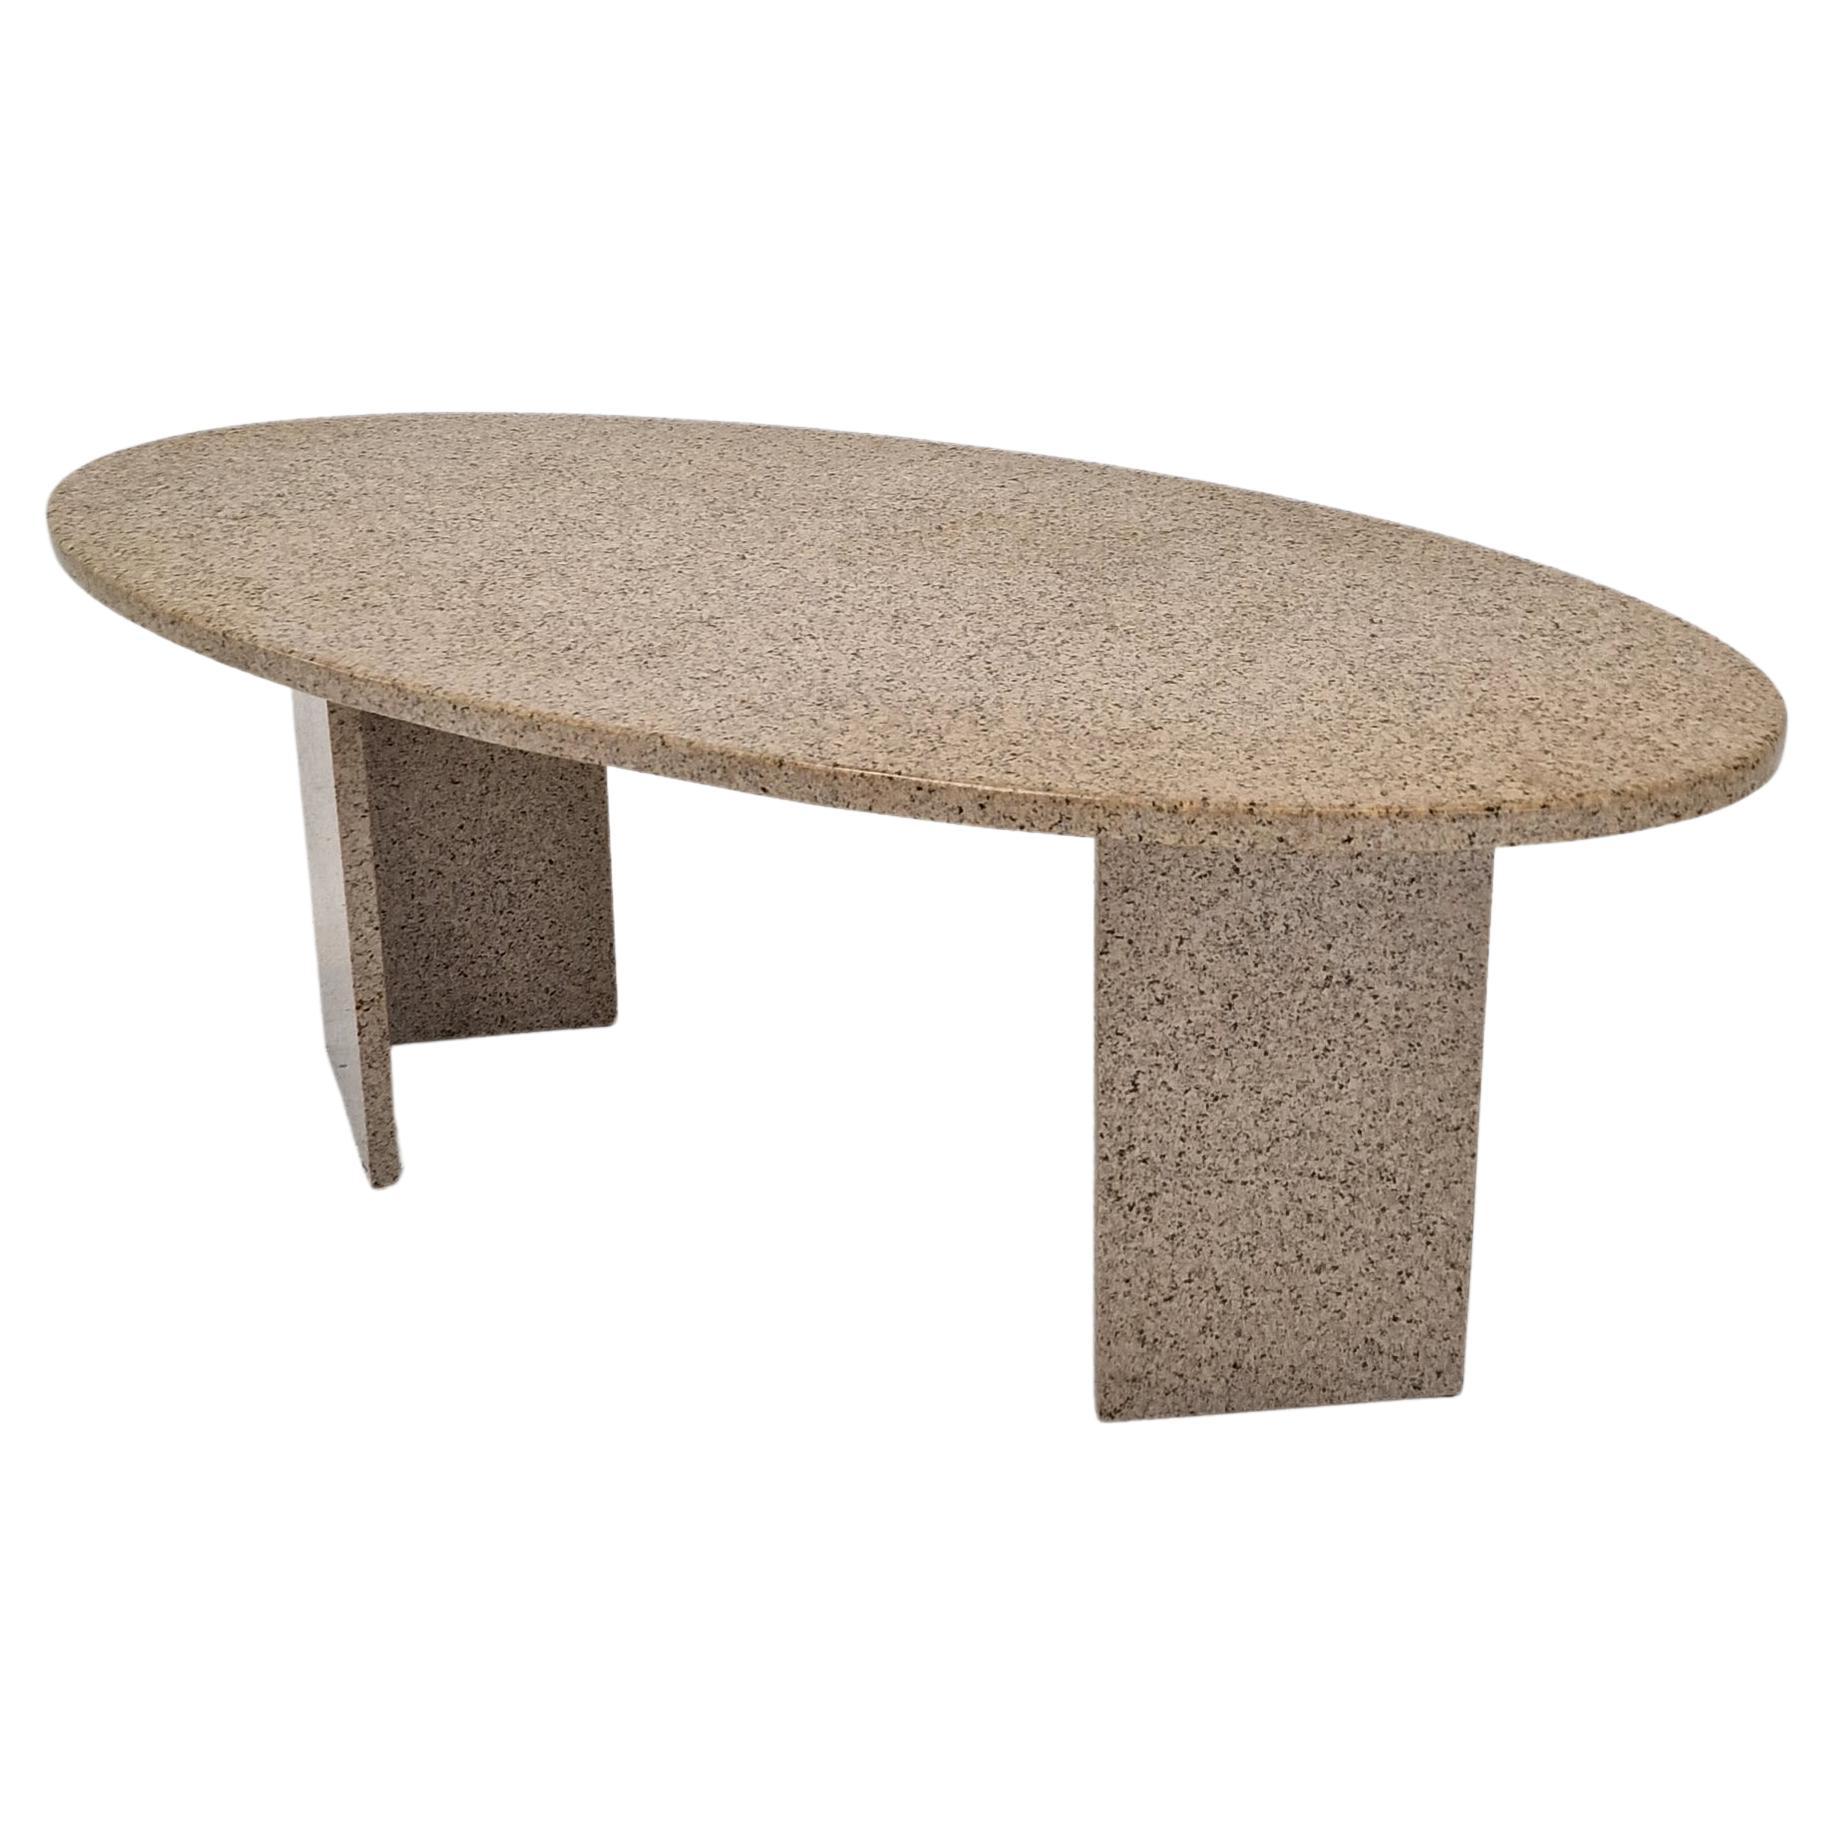 Italian Coffee or Side Table in Granite, 1980s For Sale